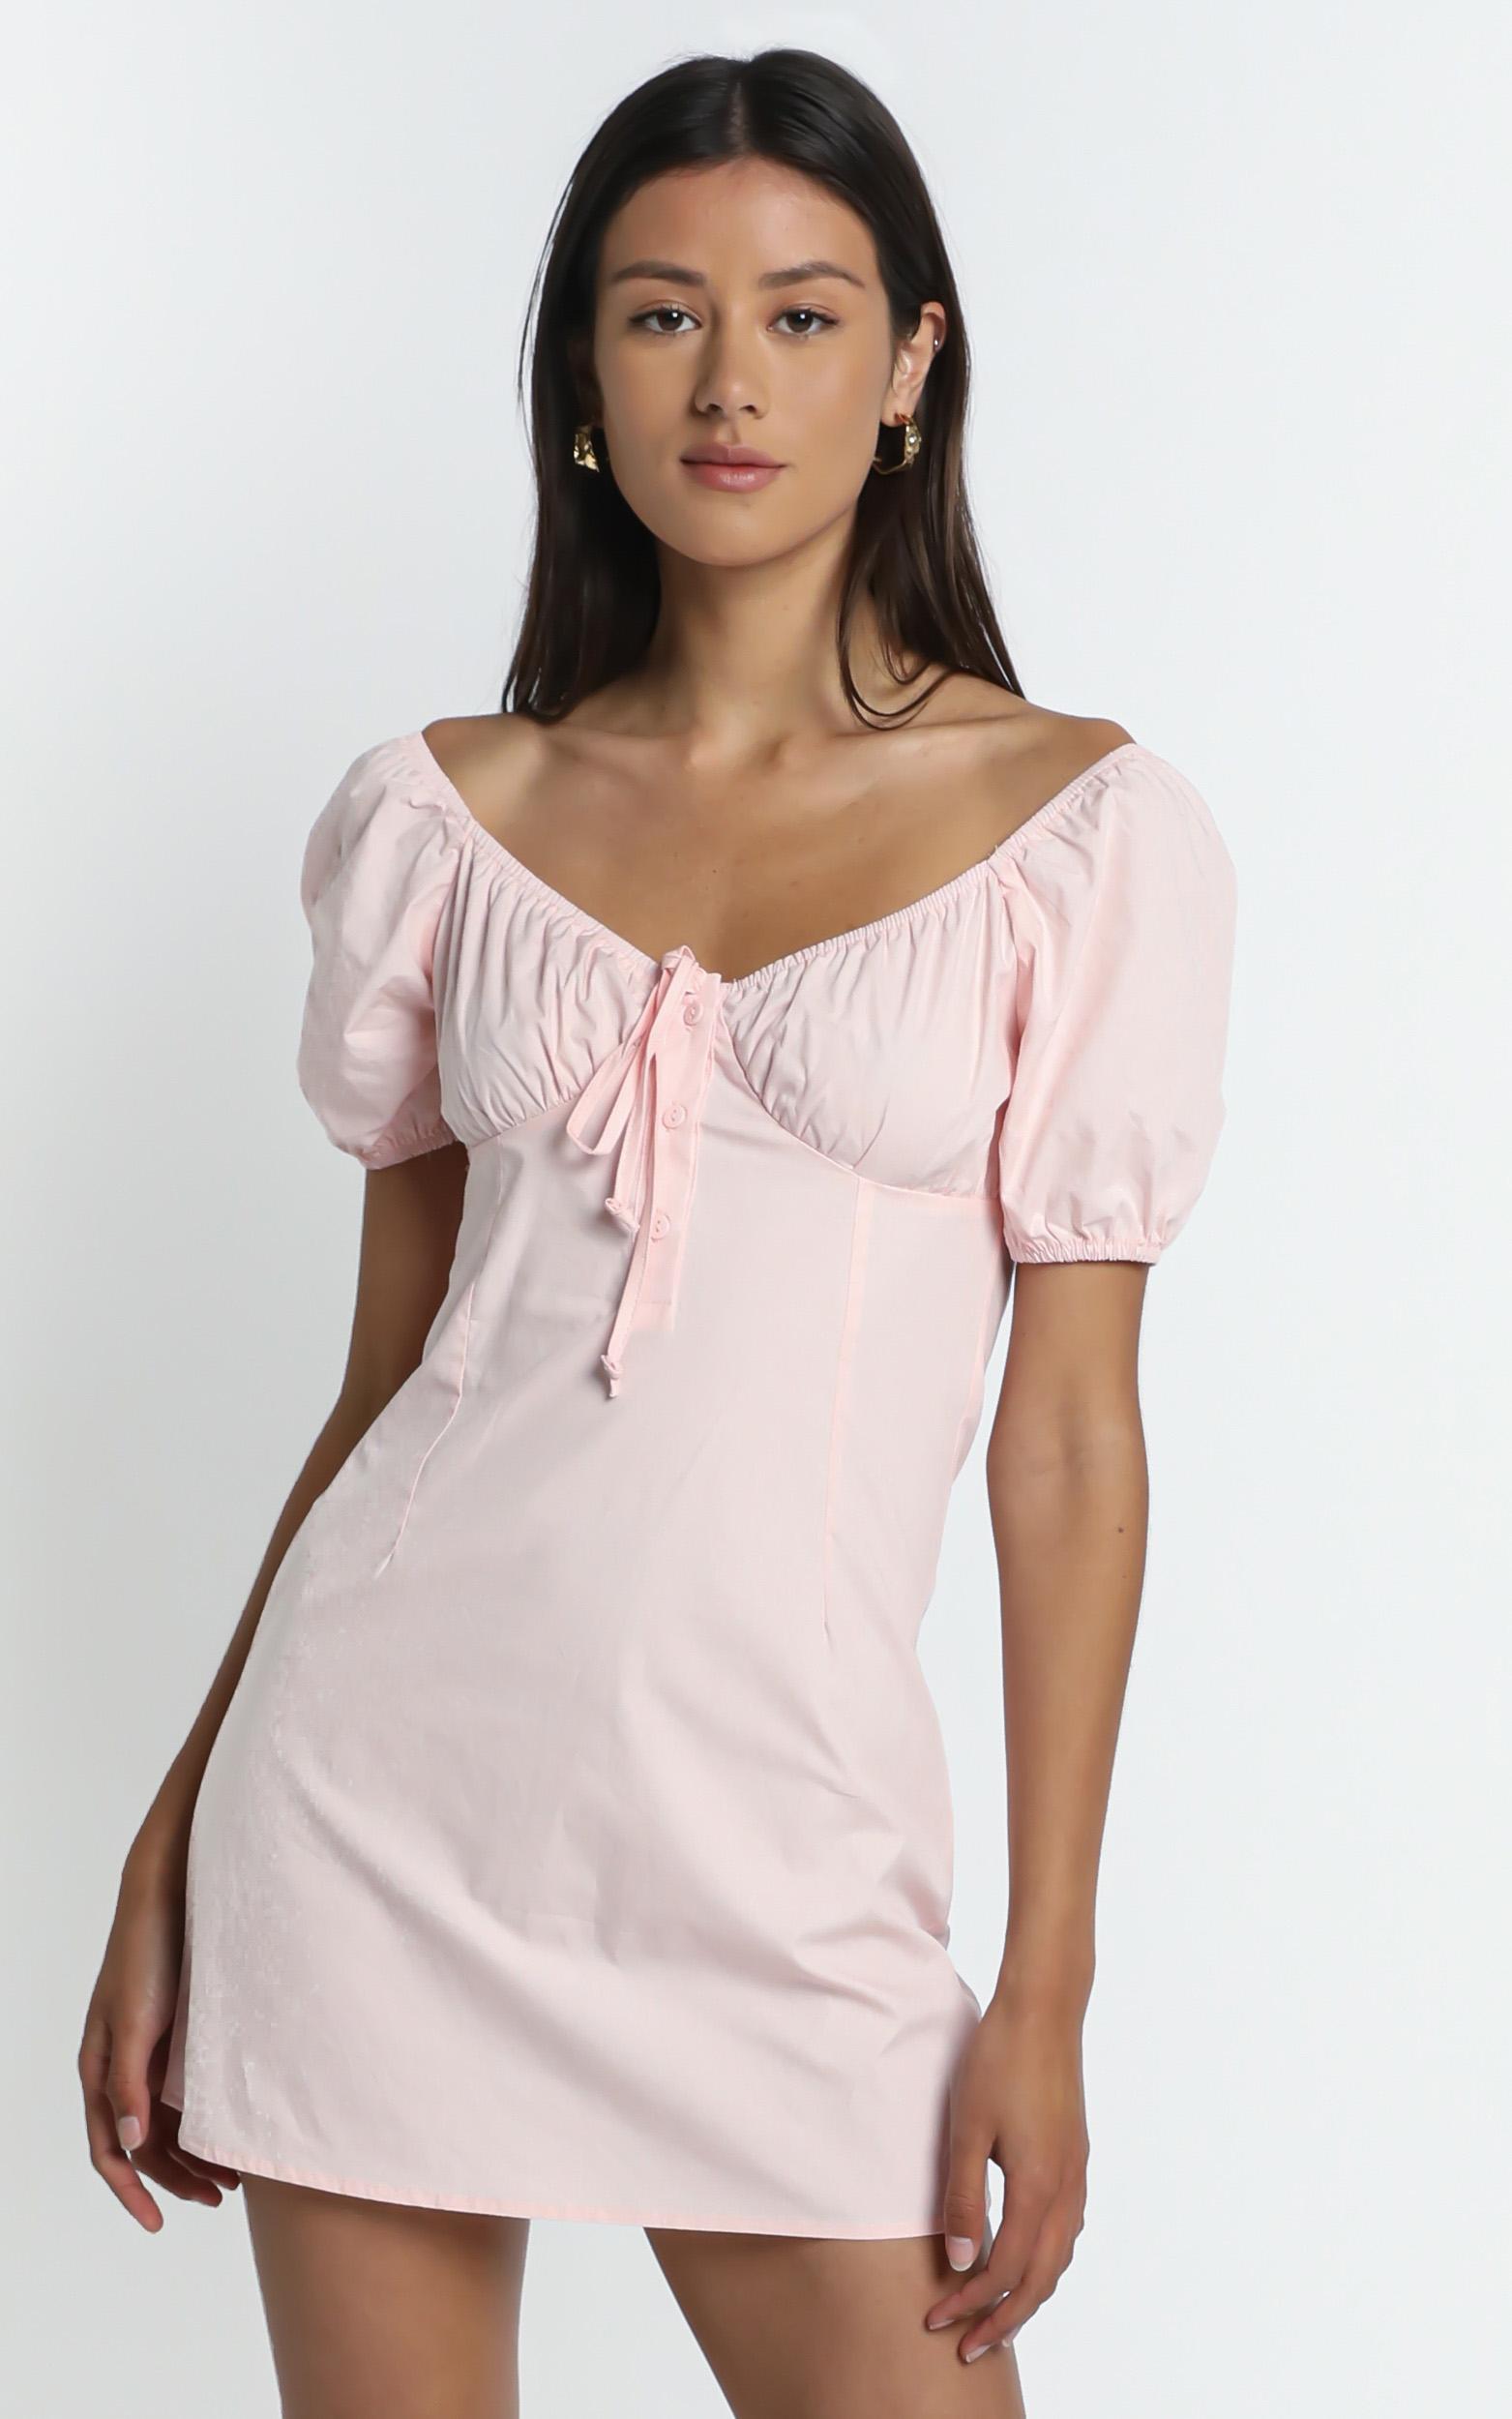 Coulson Dress in Pink - 8 (S), Pink, hi-res image number null